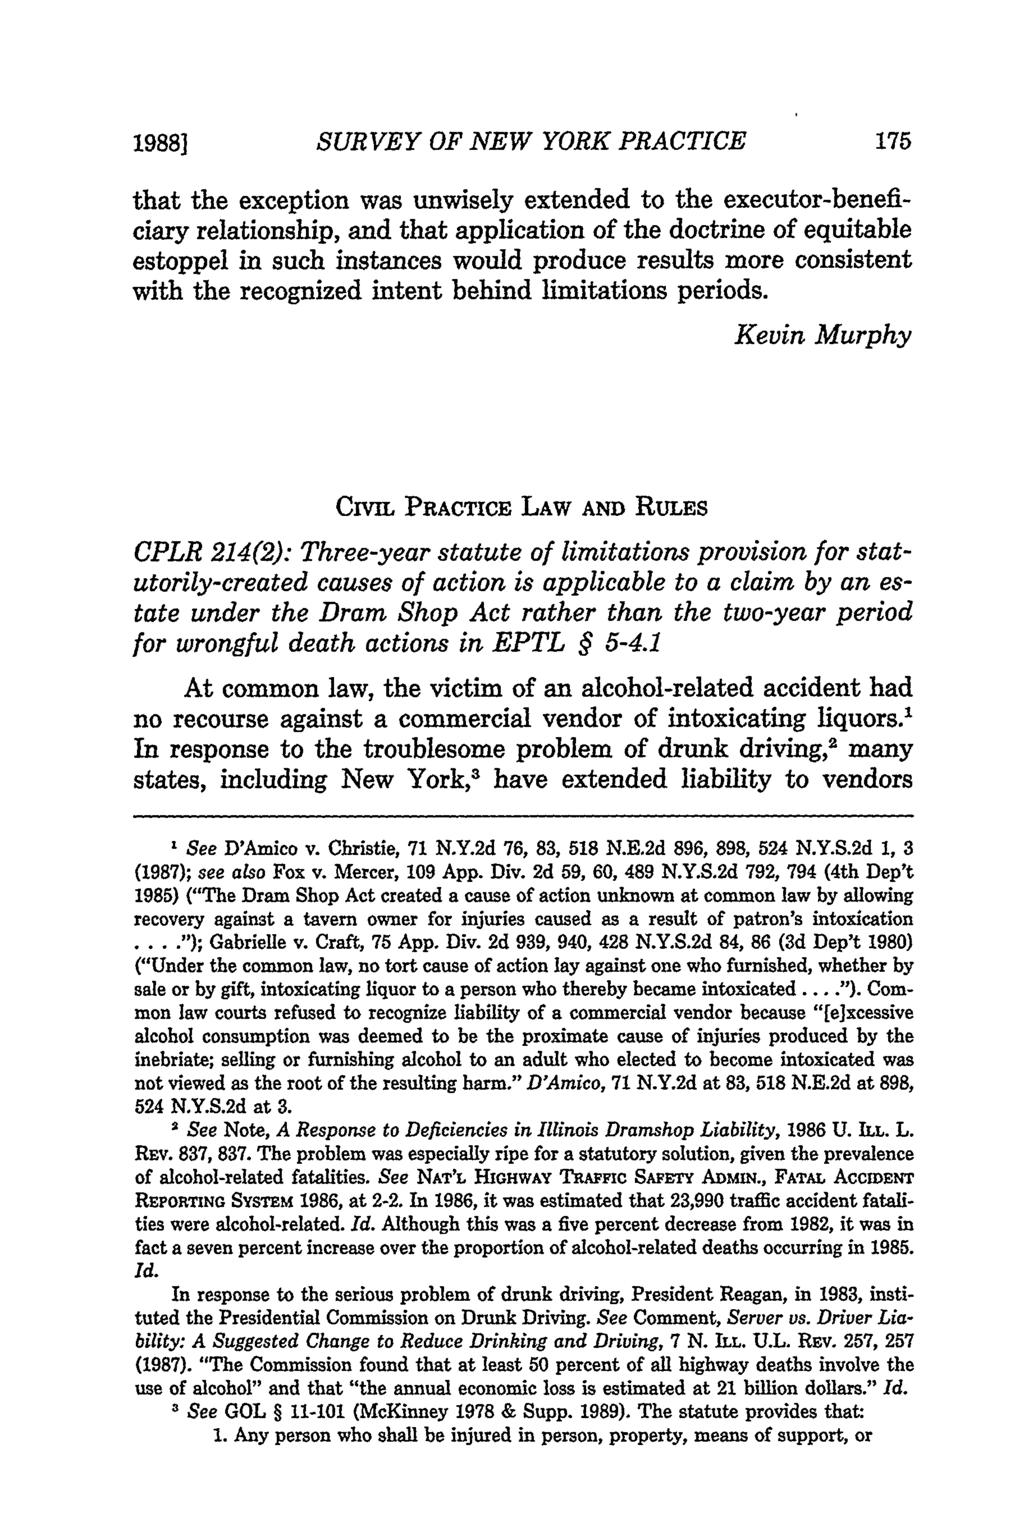 1988] SURVEY OF NEW YORK PRACTICE that the exception was unwisely extended to the executor-beneficiary relationship, and that application of the doctrine of equitable estoppel in such instances would